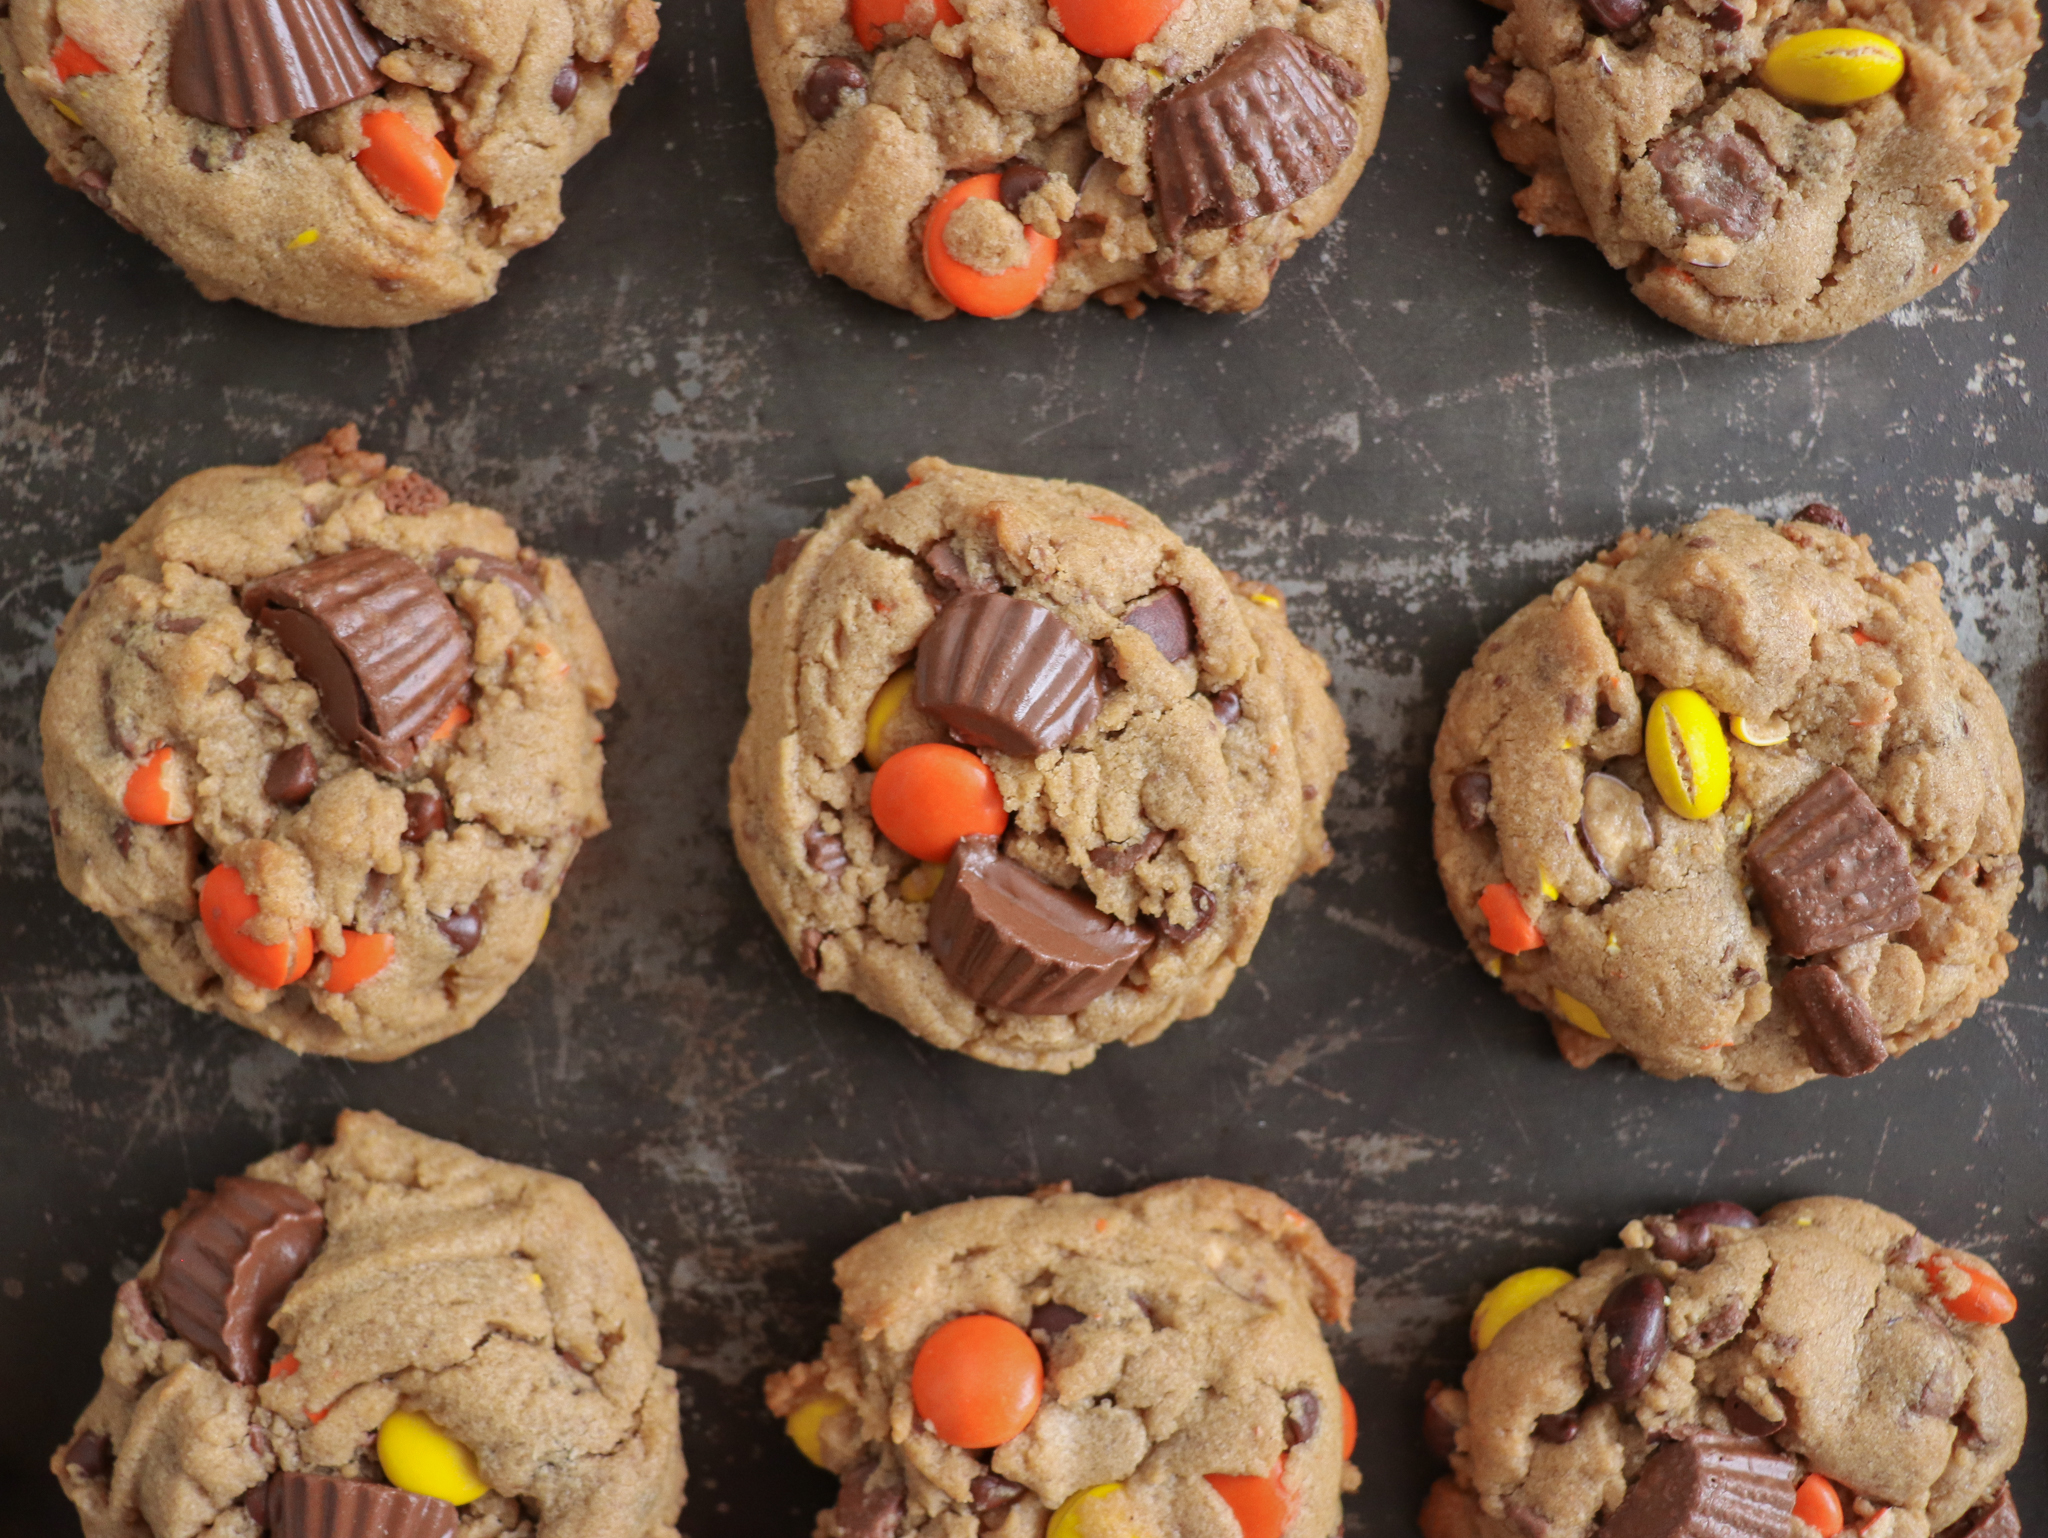 Reese’s Peanut Butter Cookies